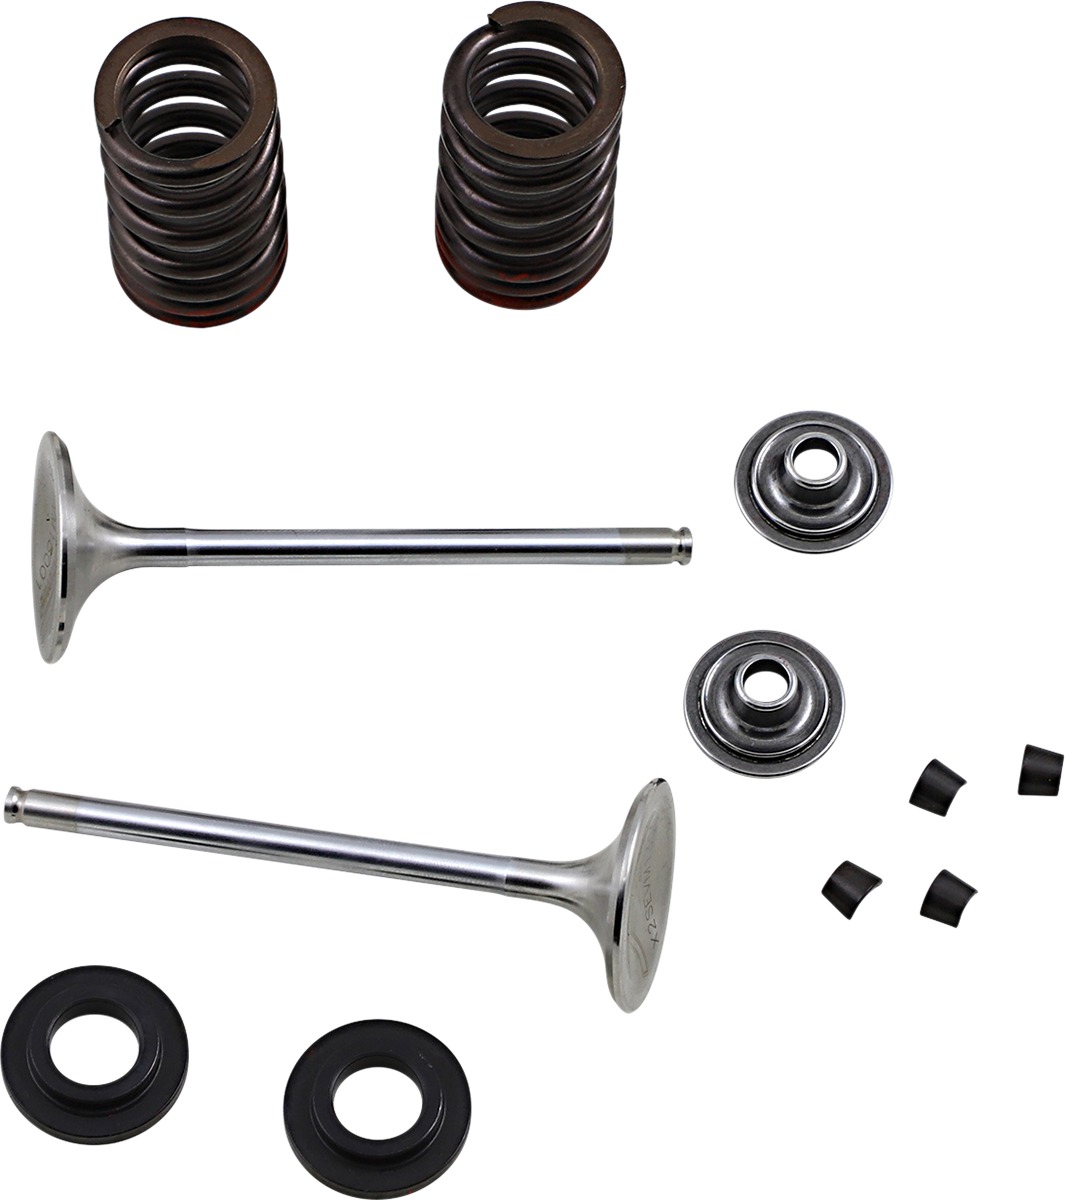 X2 Stainless Steel Exhaust Valve Kit - For 07-08 CRF450R, 06-08 TRX450R/ER, 07-15 CRF450X - Click Image to Close